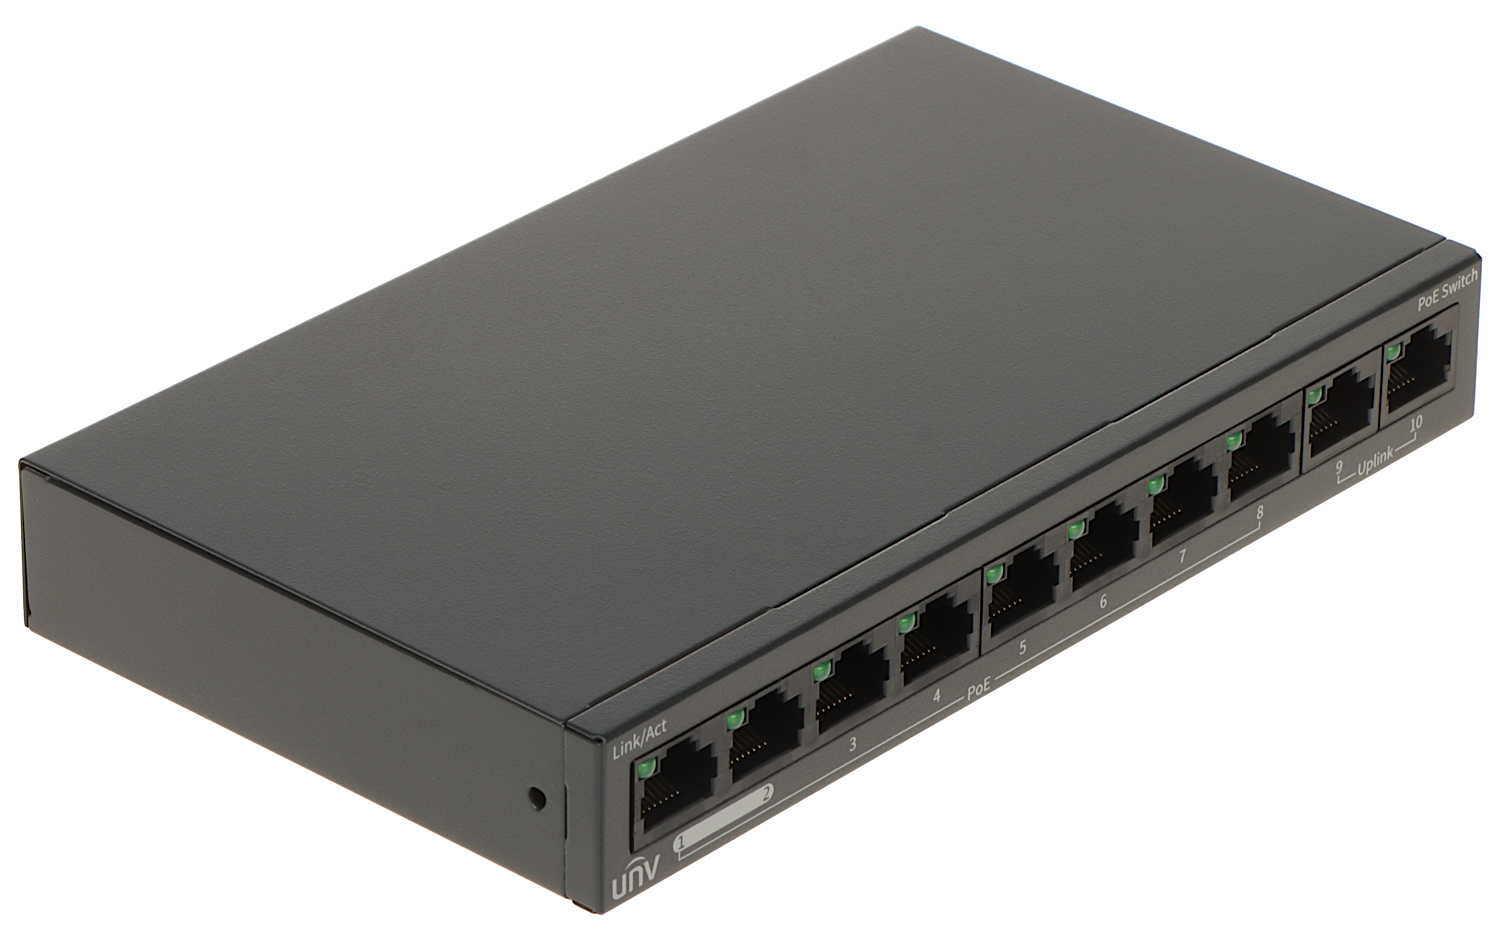 8-Port PoE Network Switch - uniview tec – a new dawn